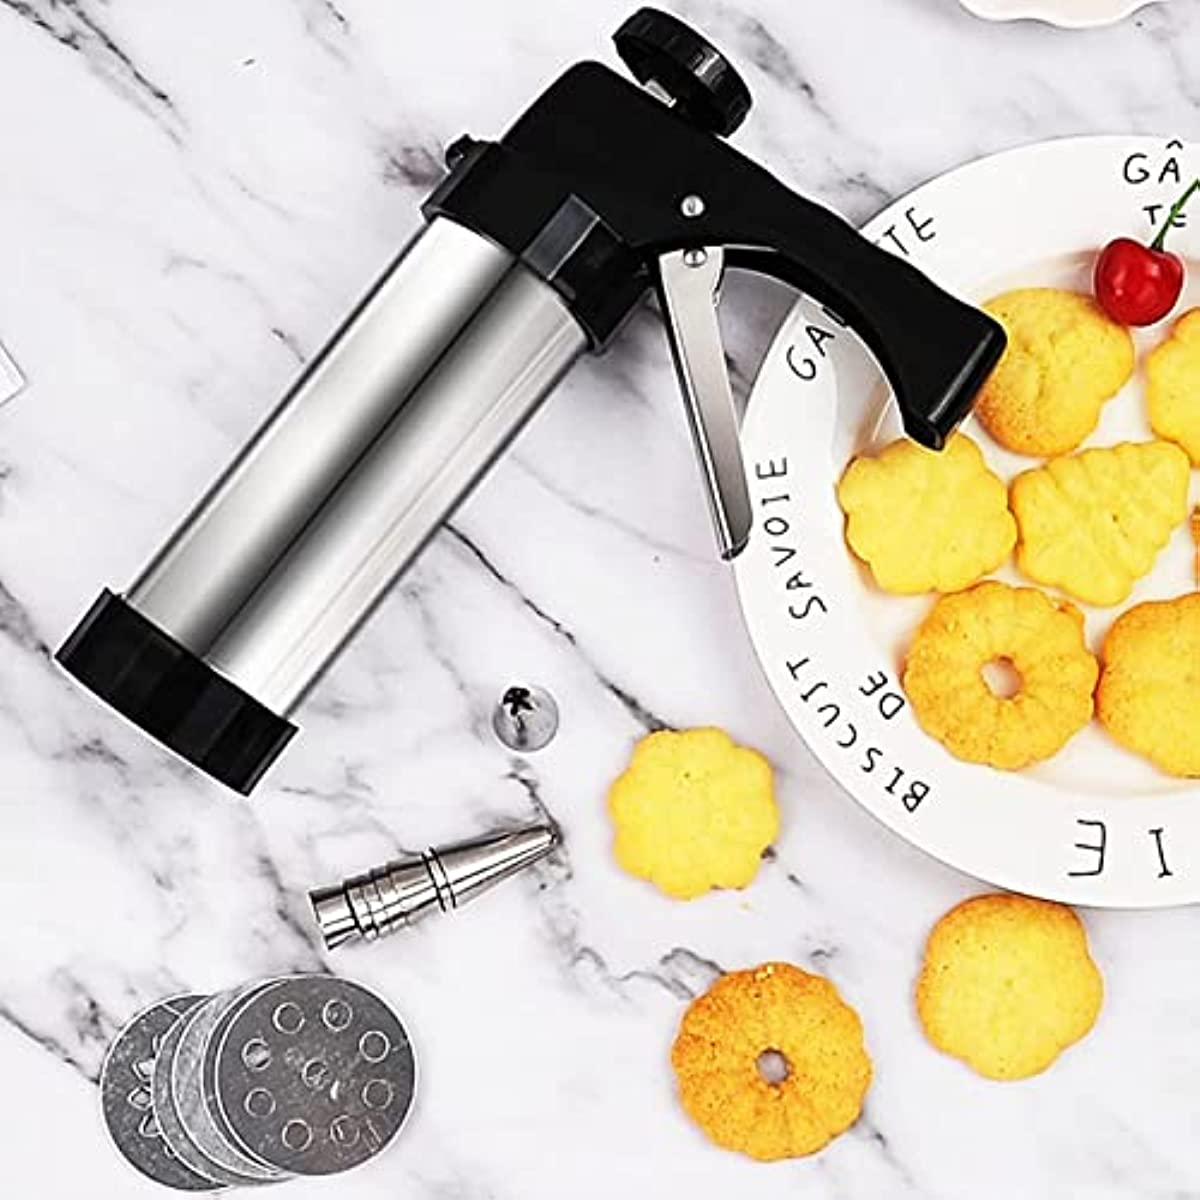  Cookie Press Gun Kit, Biscuit Maker Machine Set With 16 Cookie  discs and 6 nozzles for DIY Biscuit Maker and Churro Maker: Home & Kitchen